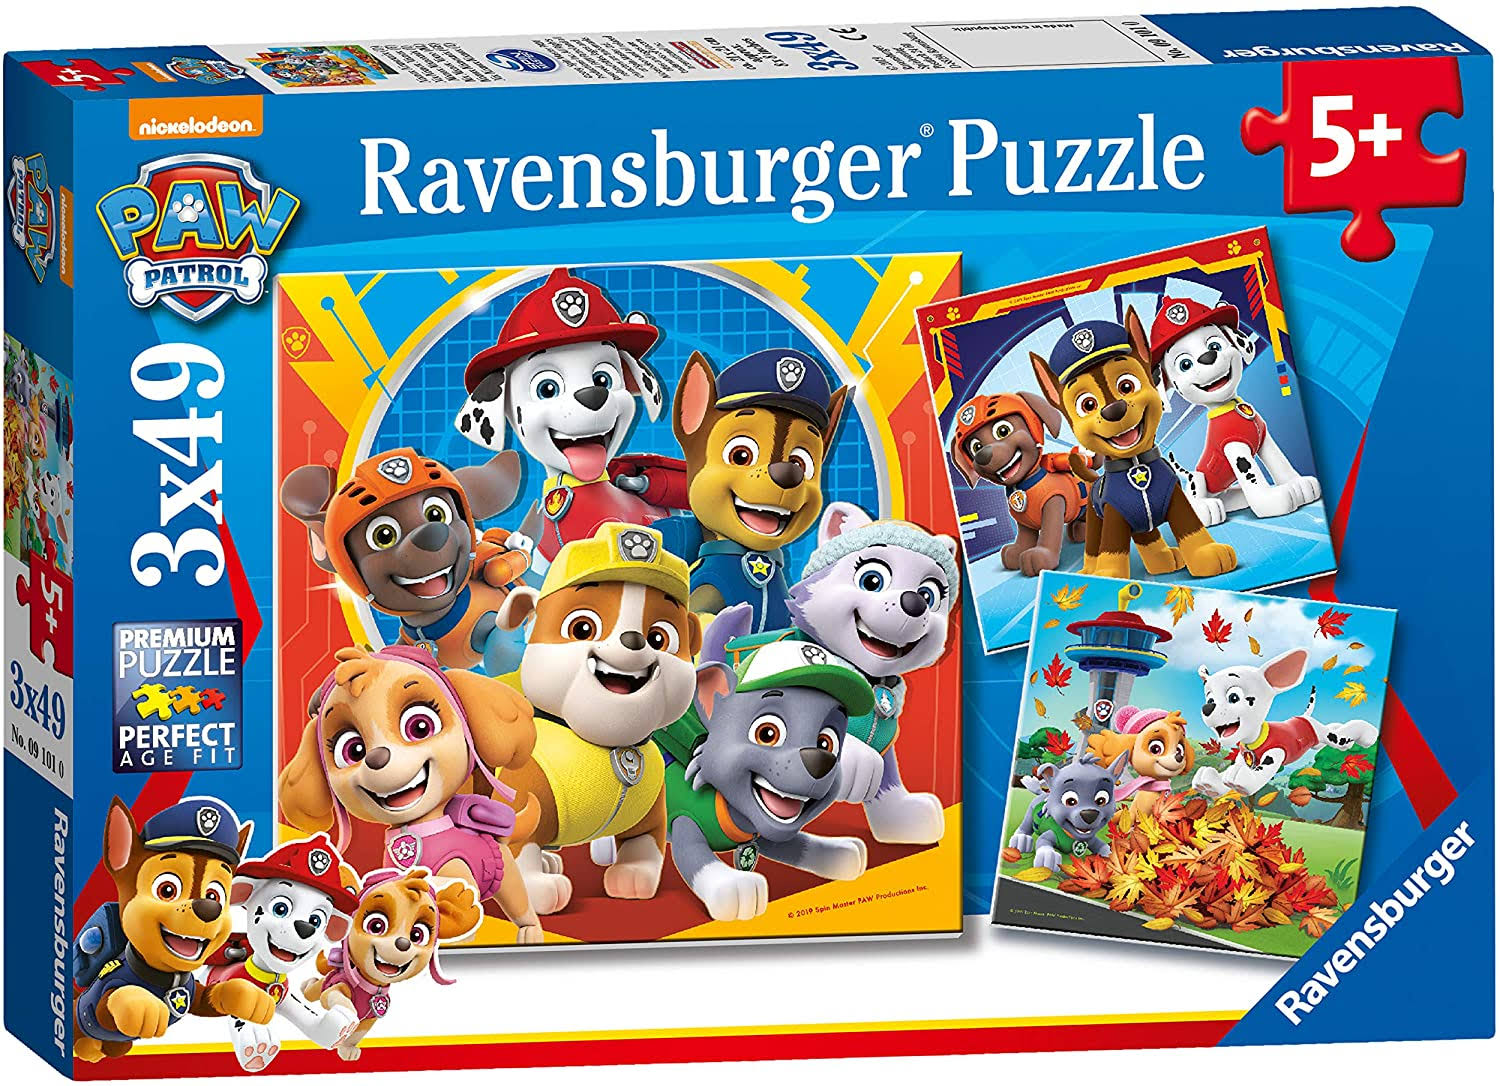 08617 Ravensburger Paw Patrol 35pc Childrens Jigsaw Puzzle Kids Toy Games Age 3+ 